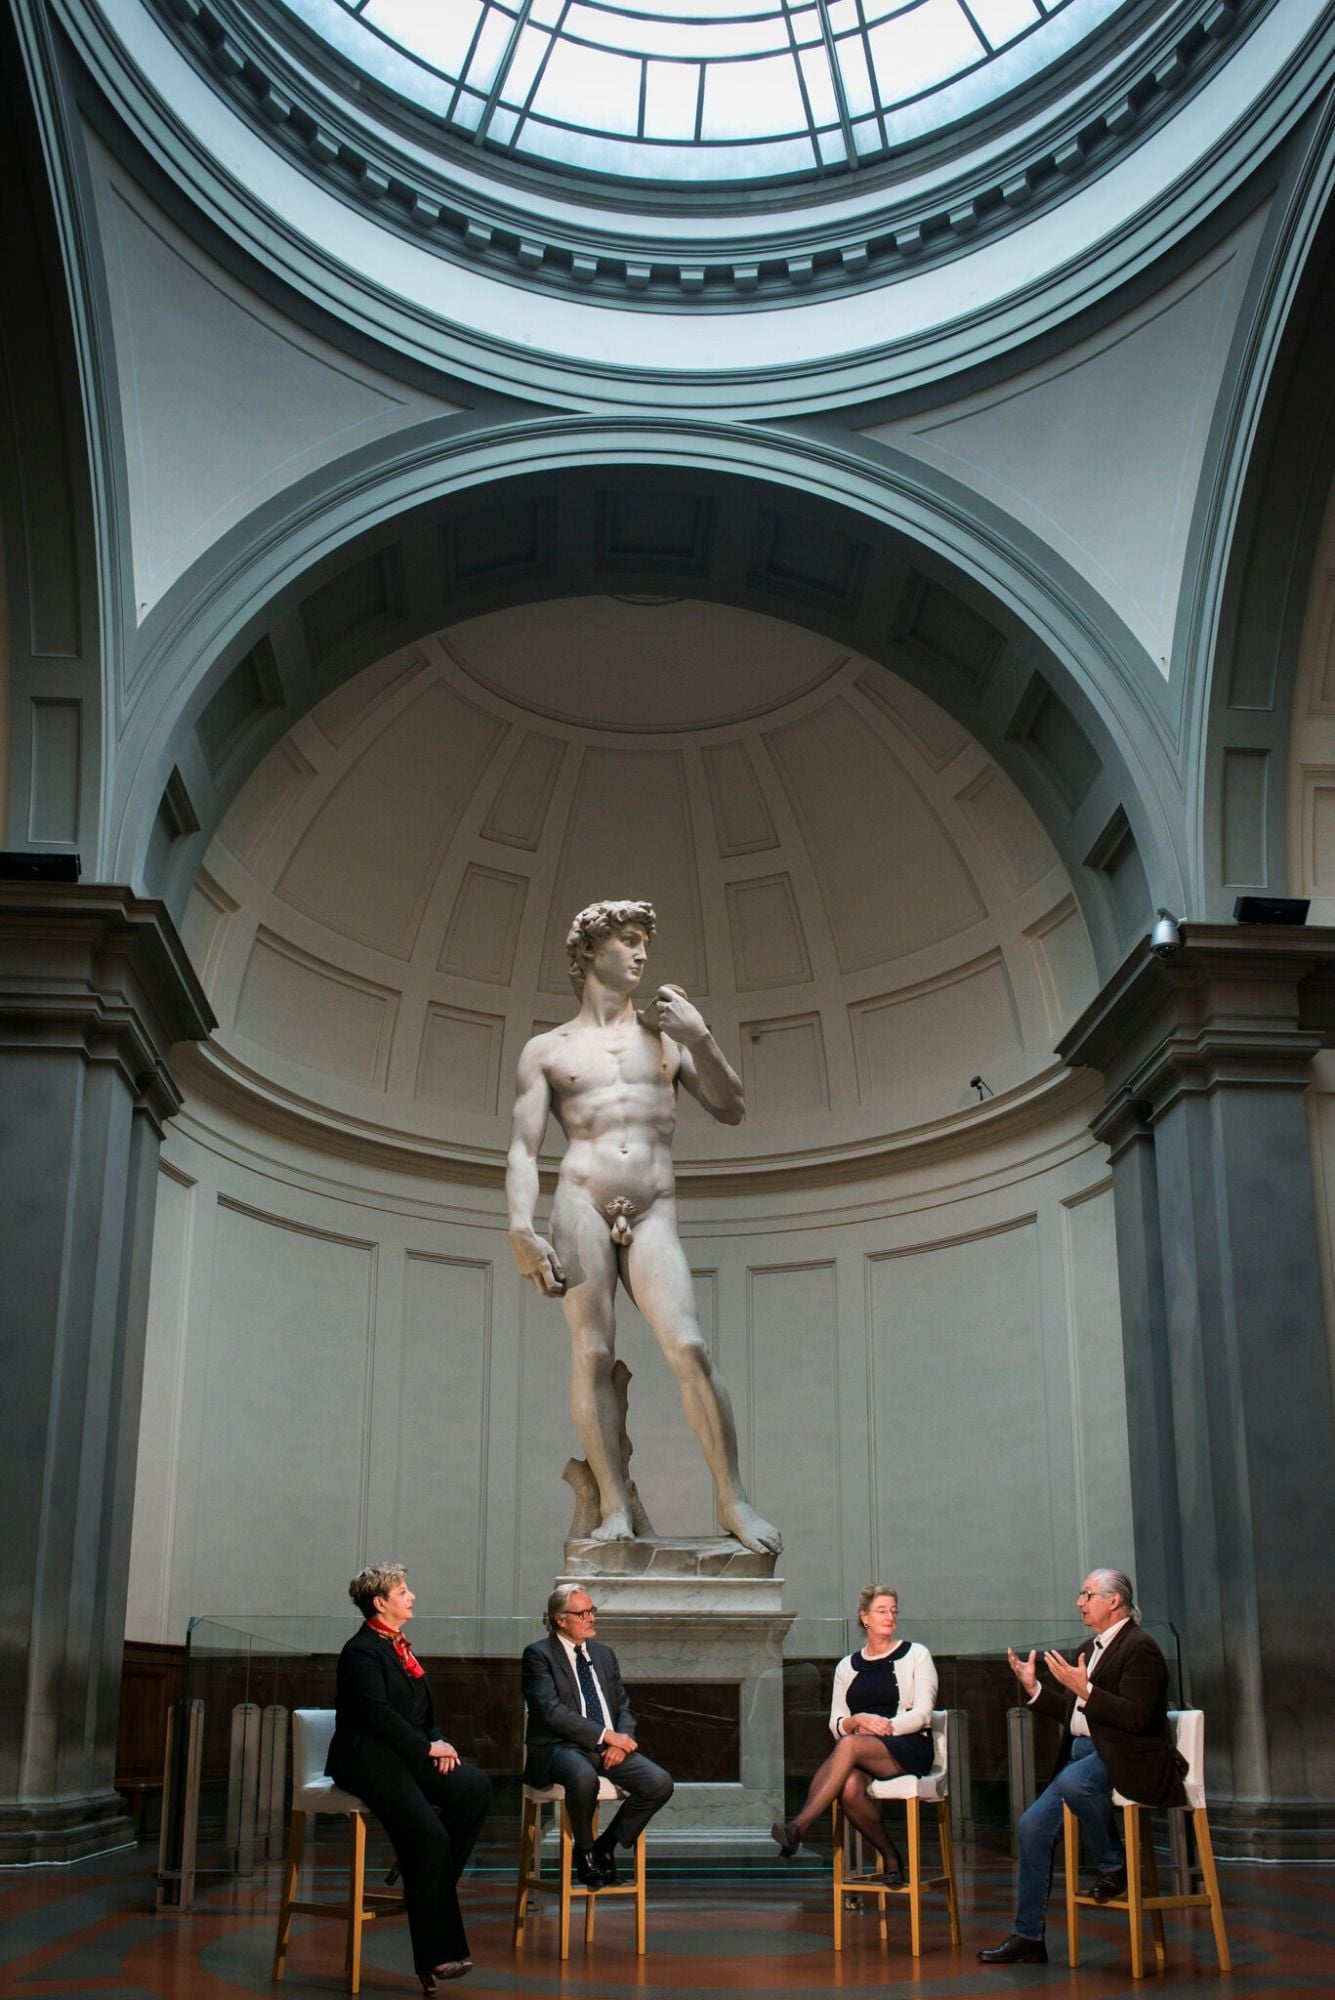 Staff members from the University of Florence discuss the process of digitally recreating Michelangelo's iconic 